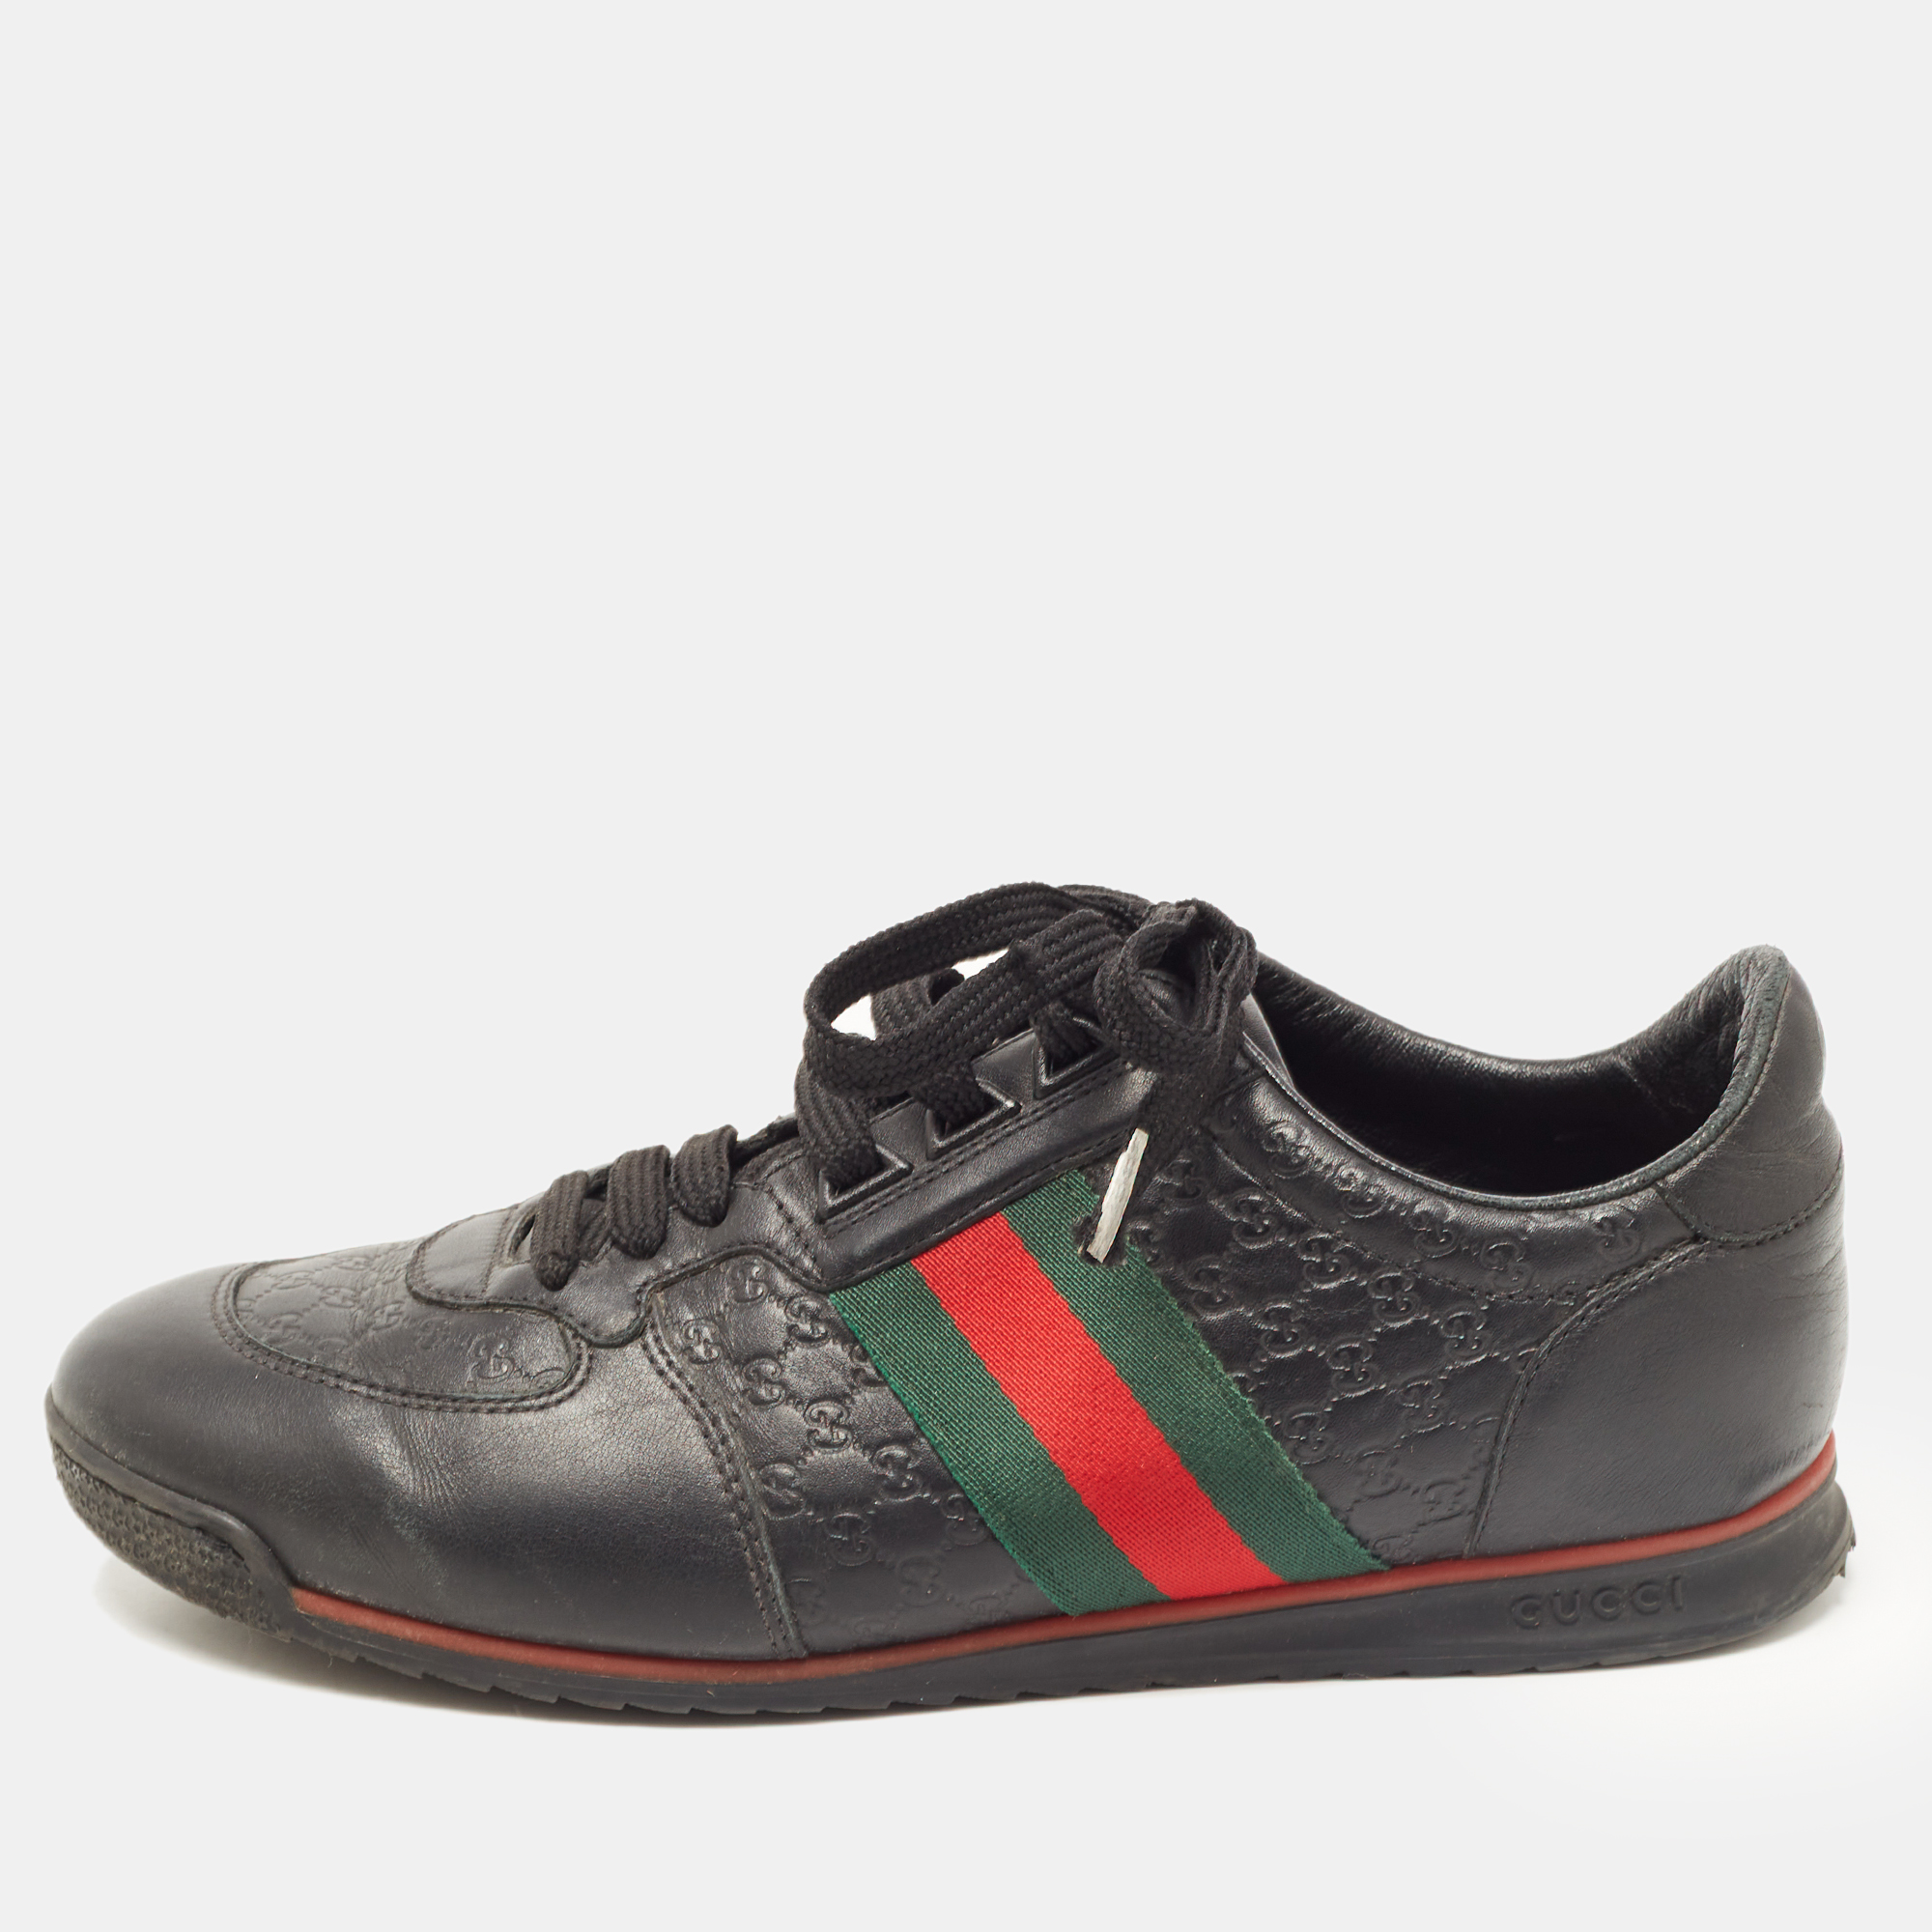 

Gucci Black Microguccissima Leather Web Low Top Sneakers Size 40.5